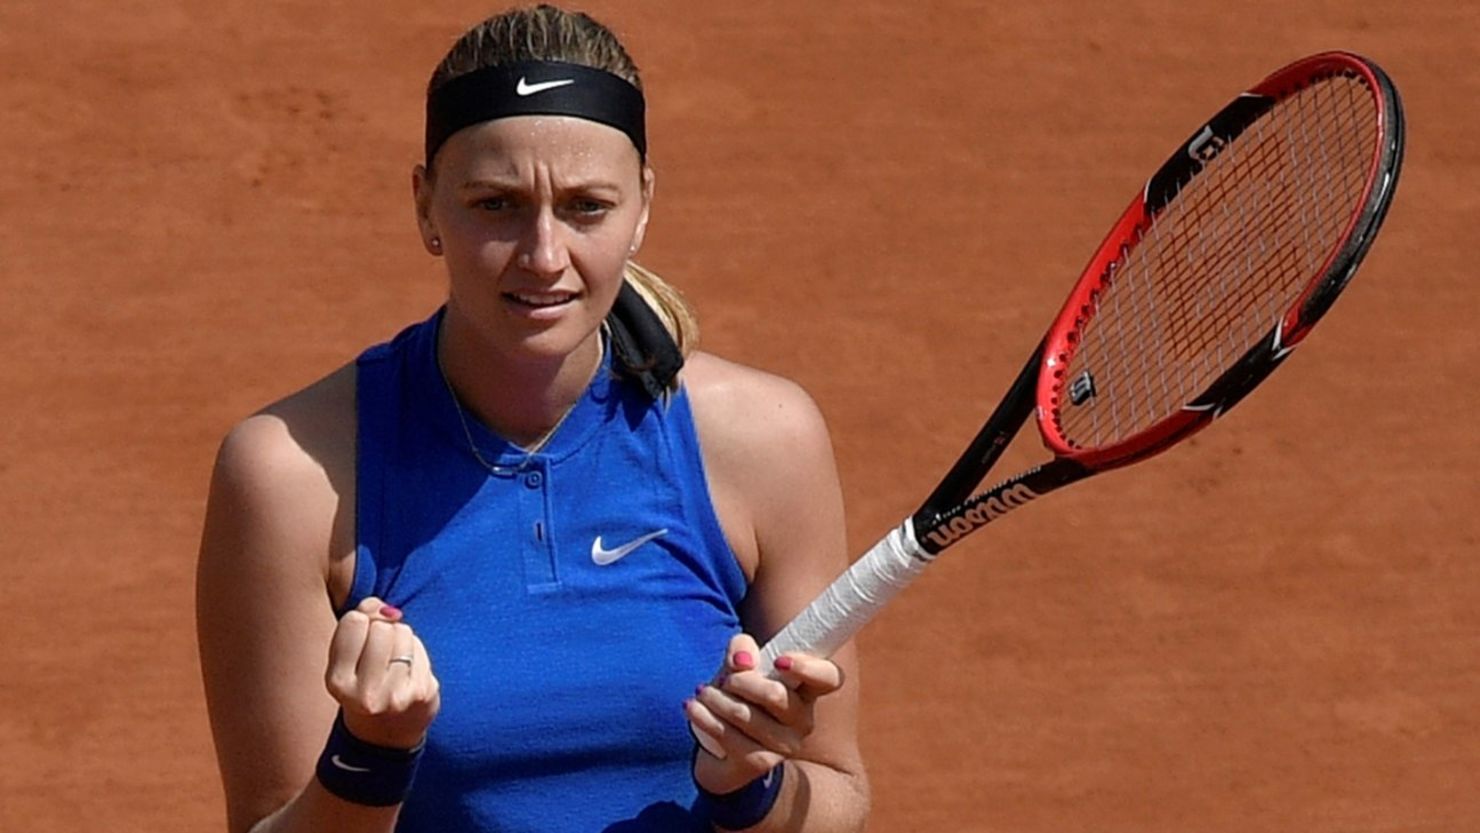 Czech Petra Kvitova was knocked out of last year's French Open in round three